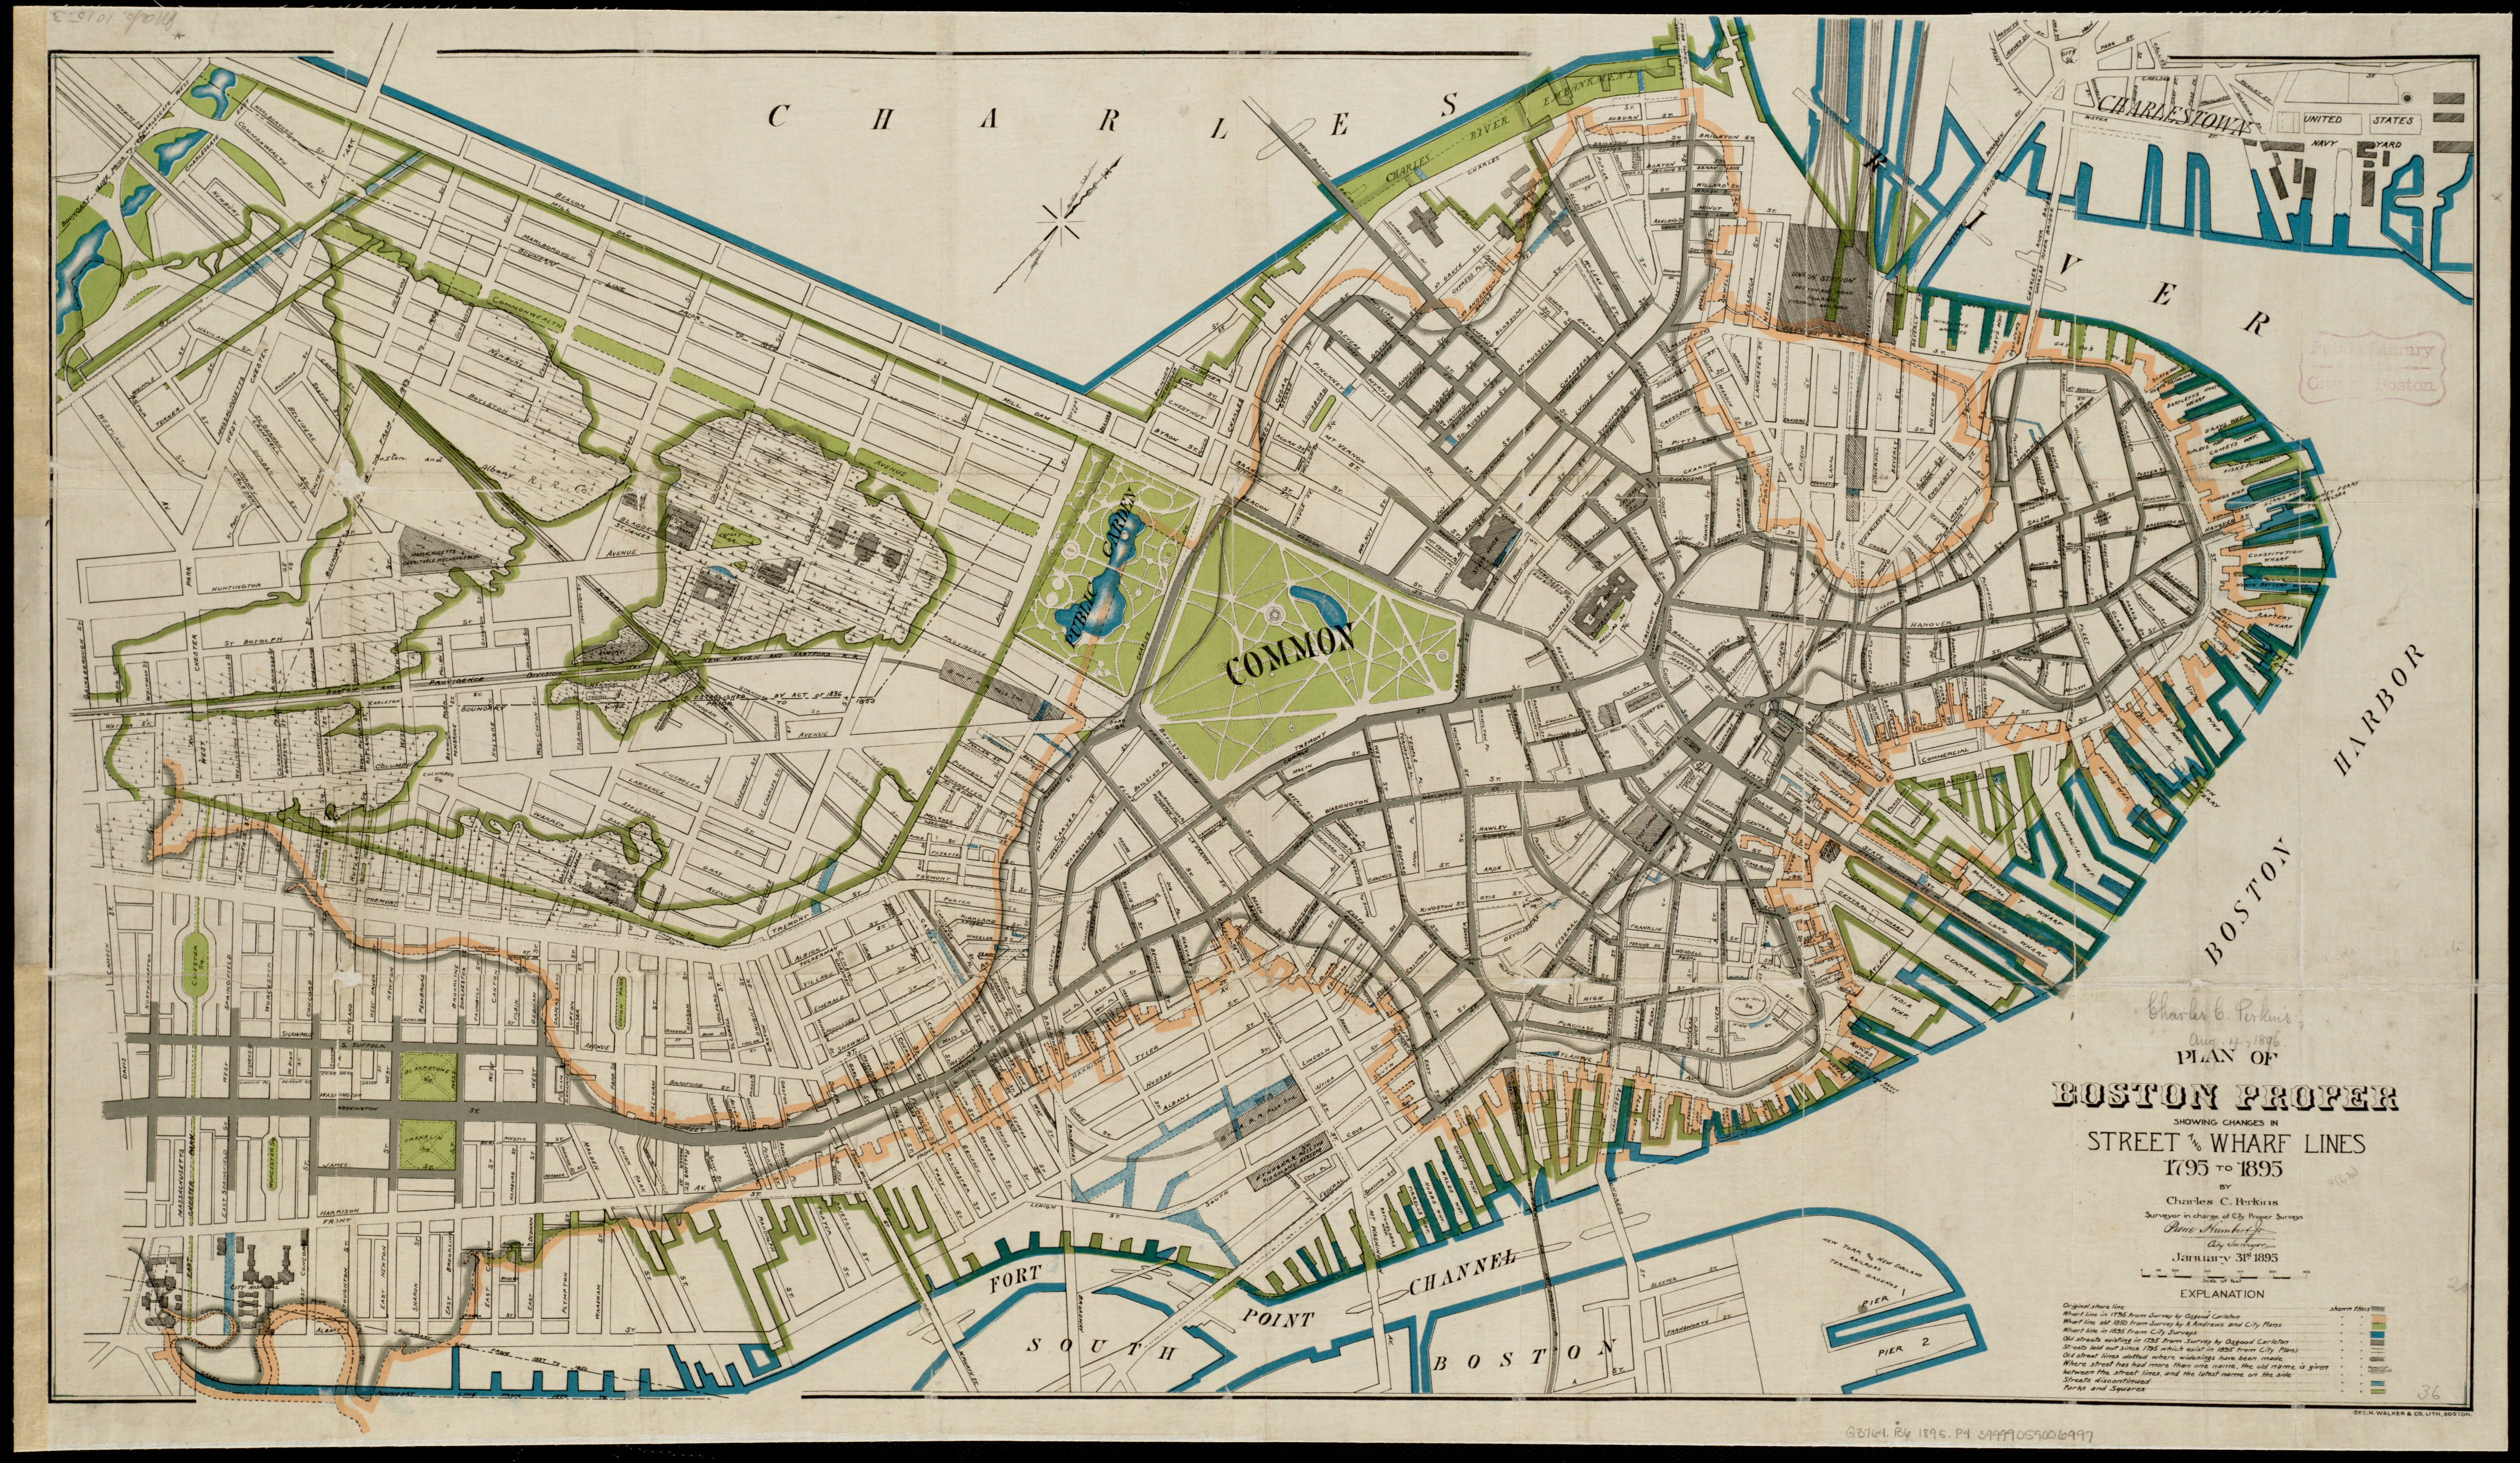 This map celebrates a century of shoreline change in Boston, and will will be on display as a part of Becoming Boston exhibition.